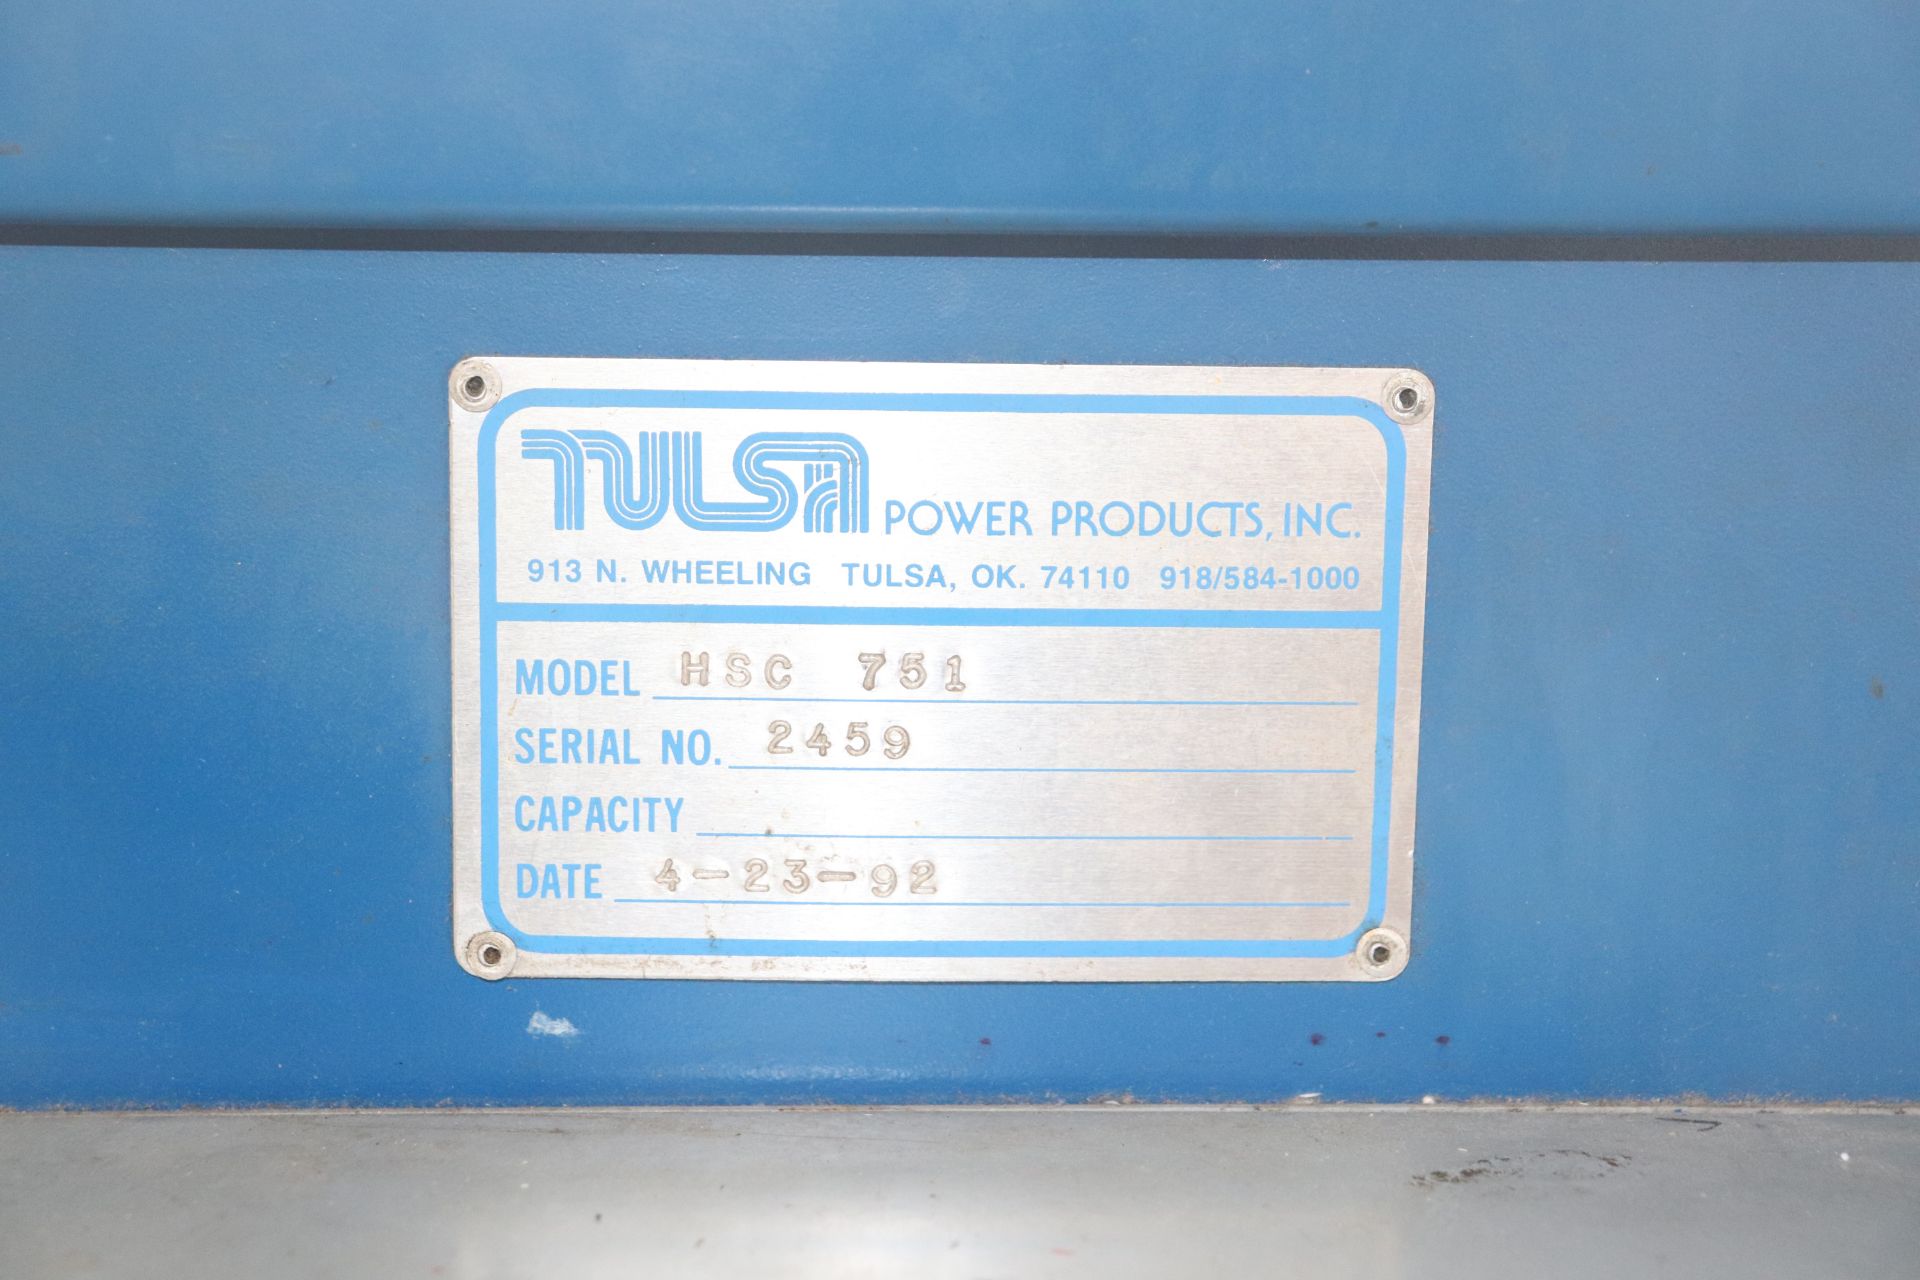 High Speed Spooler and Coiler (HSS Series)-HSC 751 Tulsa Power Products serial #2459 coiler with fo - Image 3 of 4